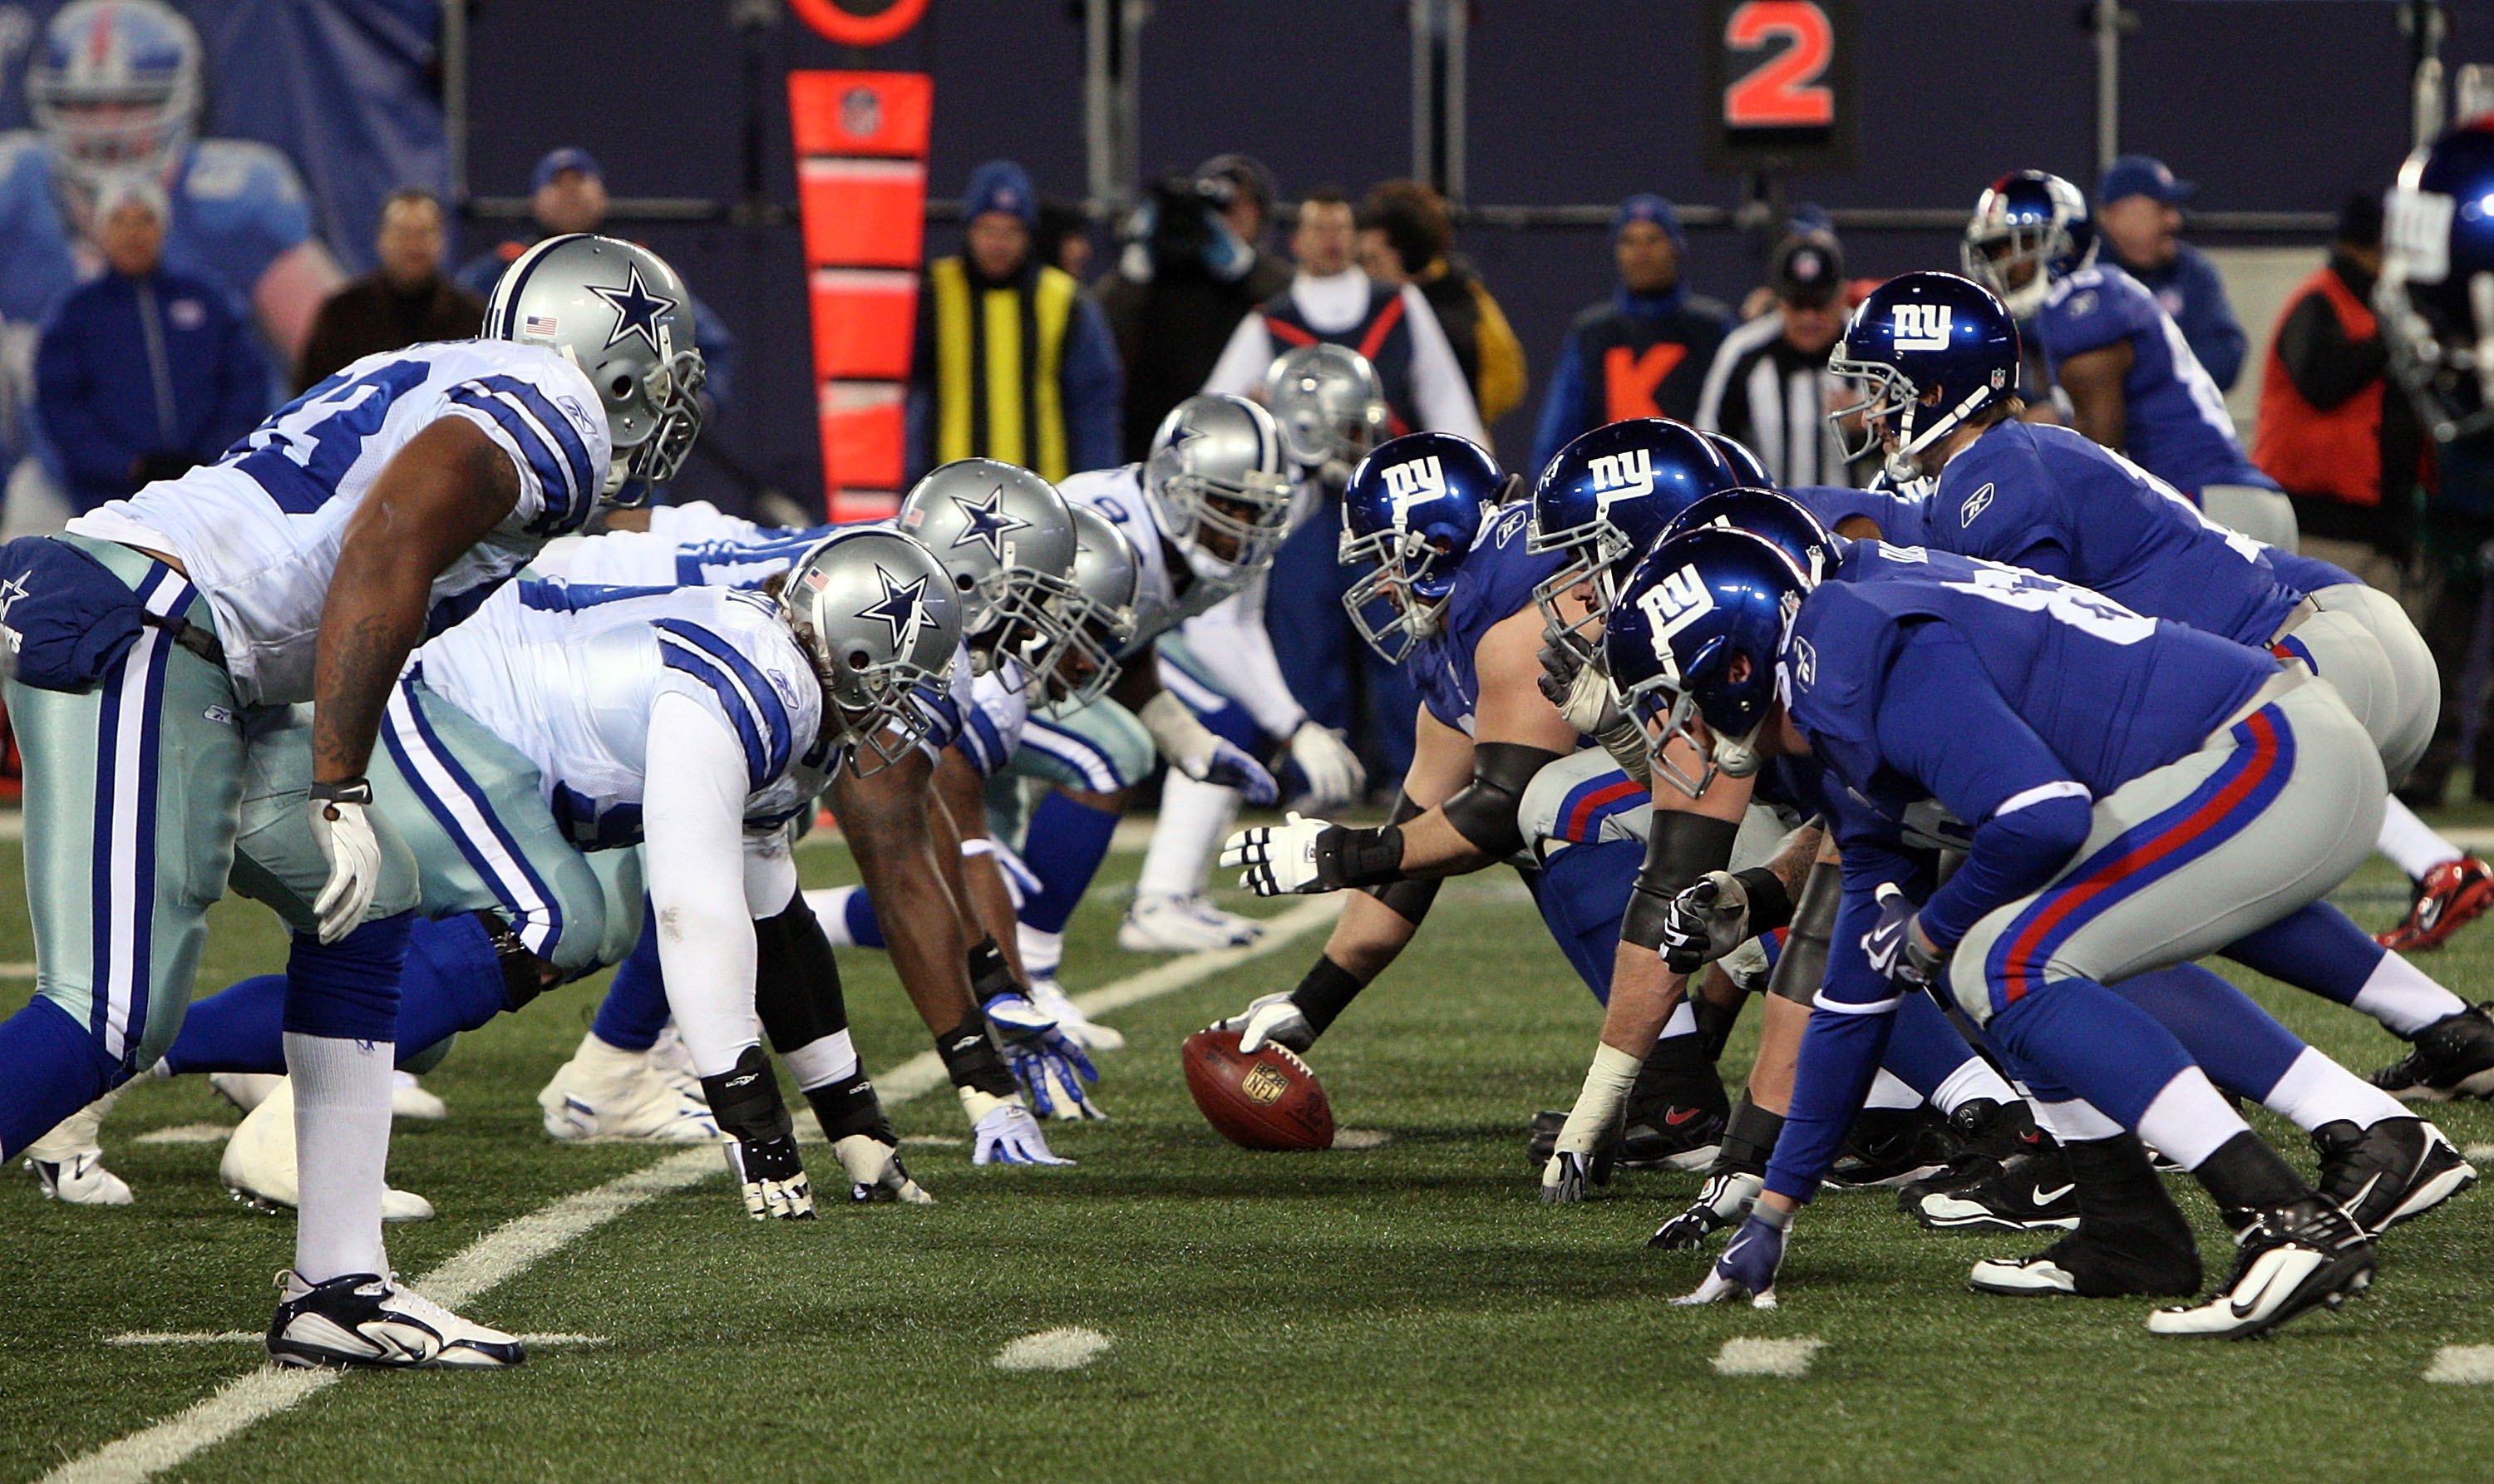 EAST RUTHERFORD, NJ - DECEMBER 06:  The New York Giants lineup against the Dallas Cowboys on December 6, 2009 at Giants Stadium in East Rutherford, New Jersey. The Giants defeated the Cowboys 31-24.  (Photo by Jim McIsaac/Getty Images)